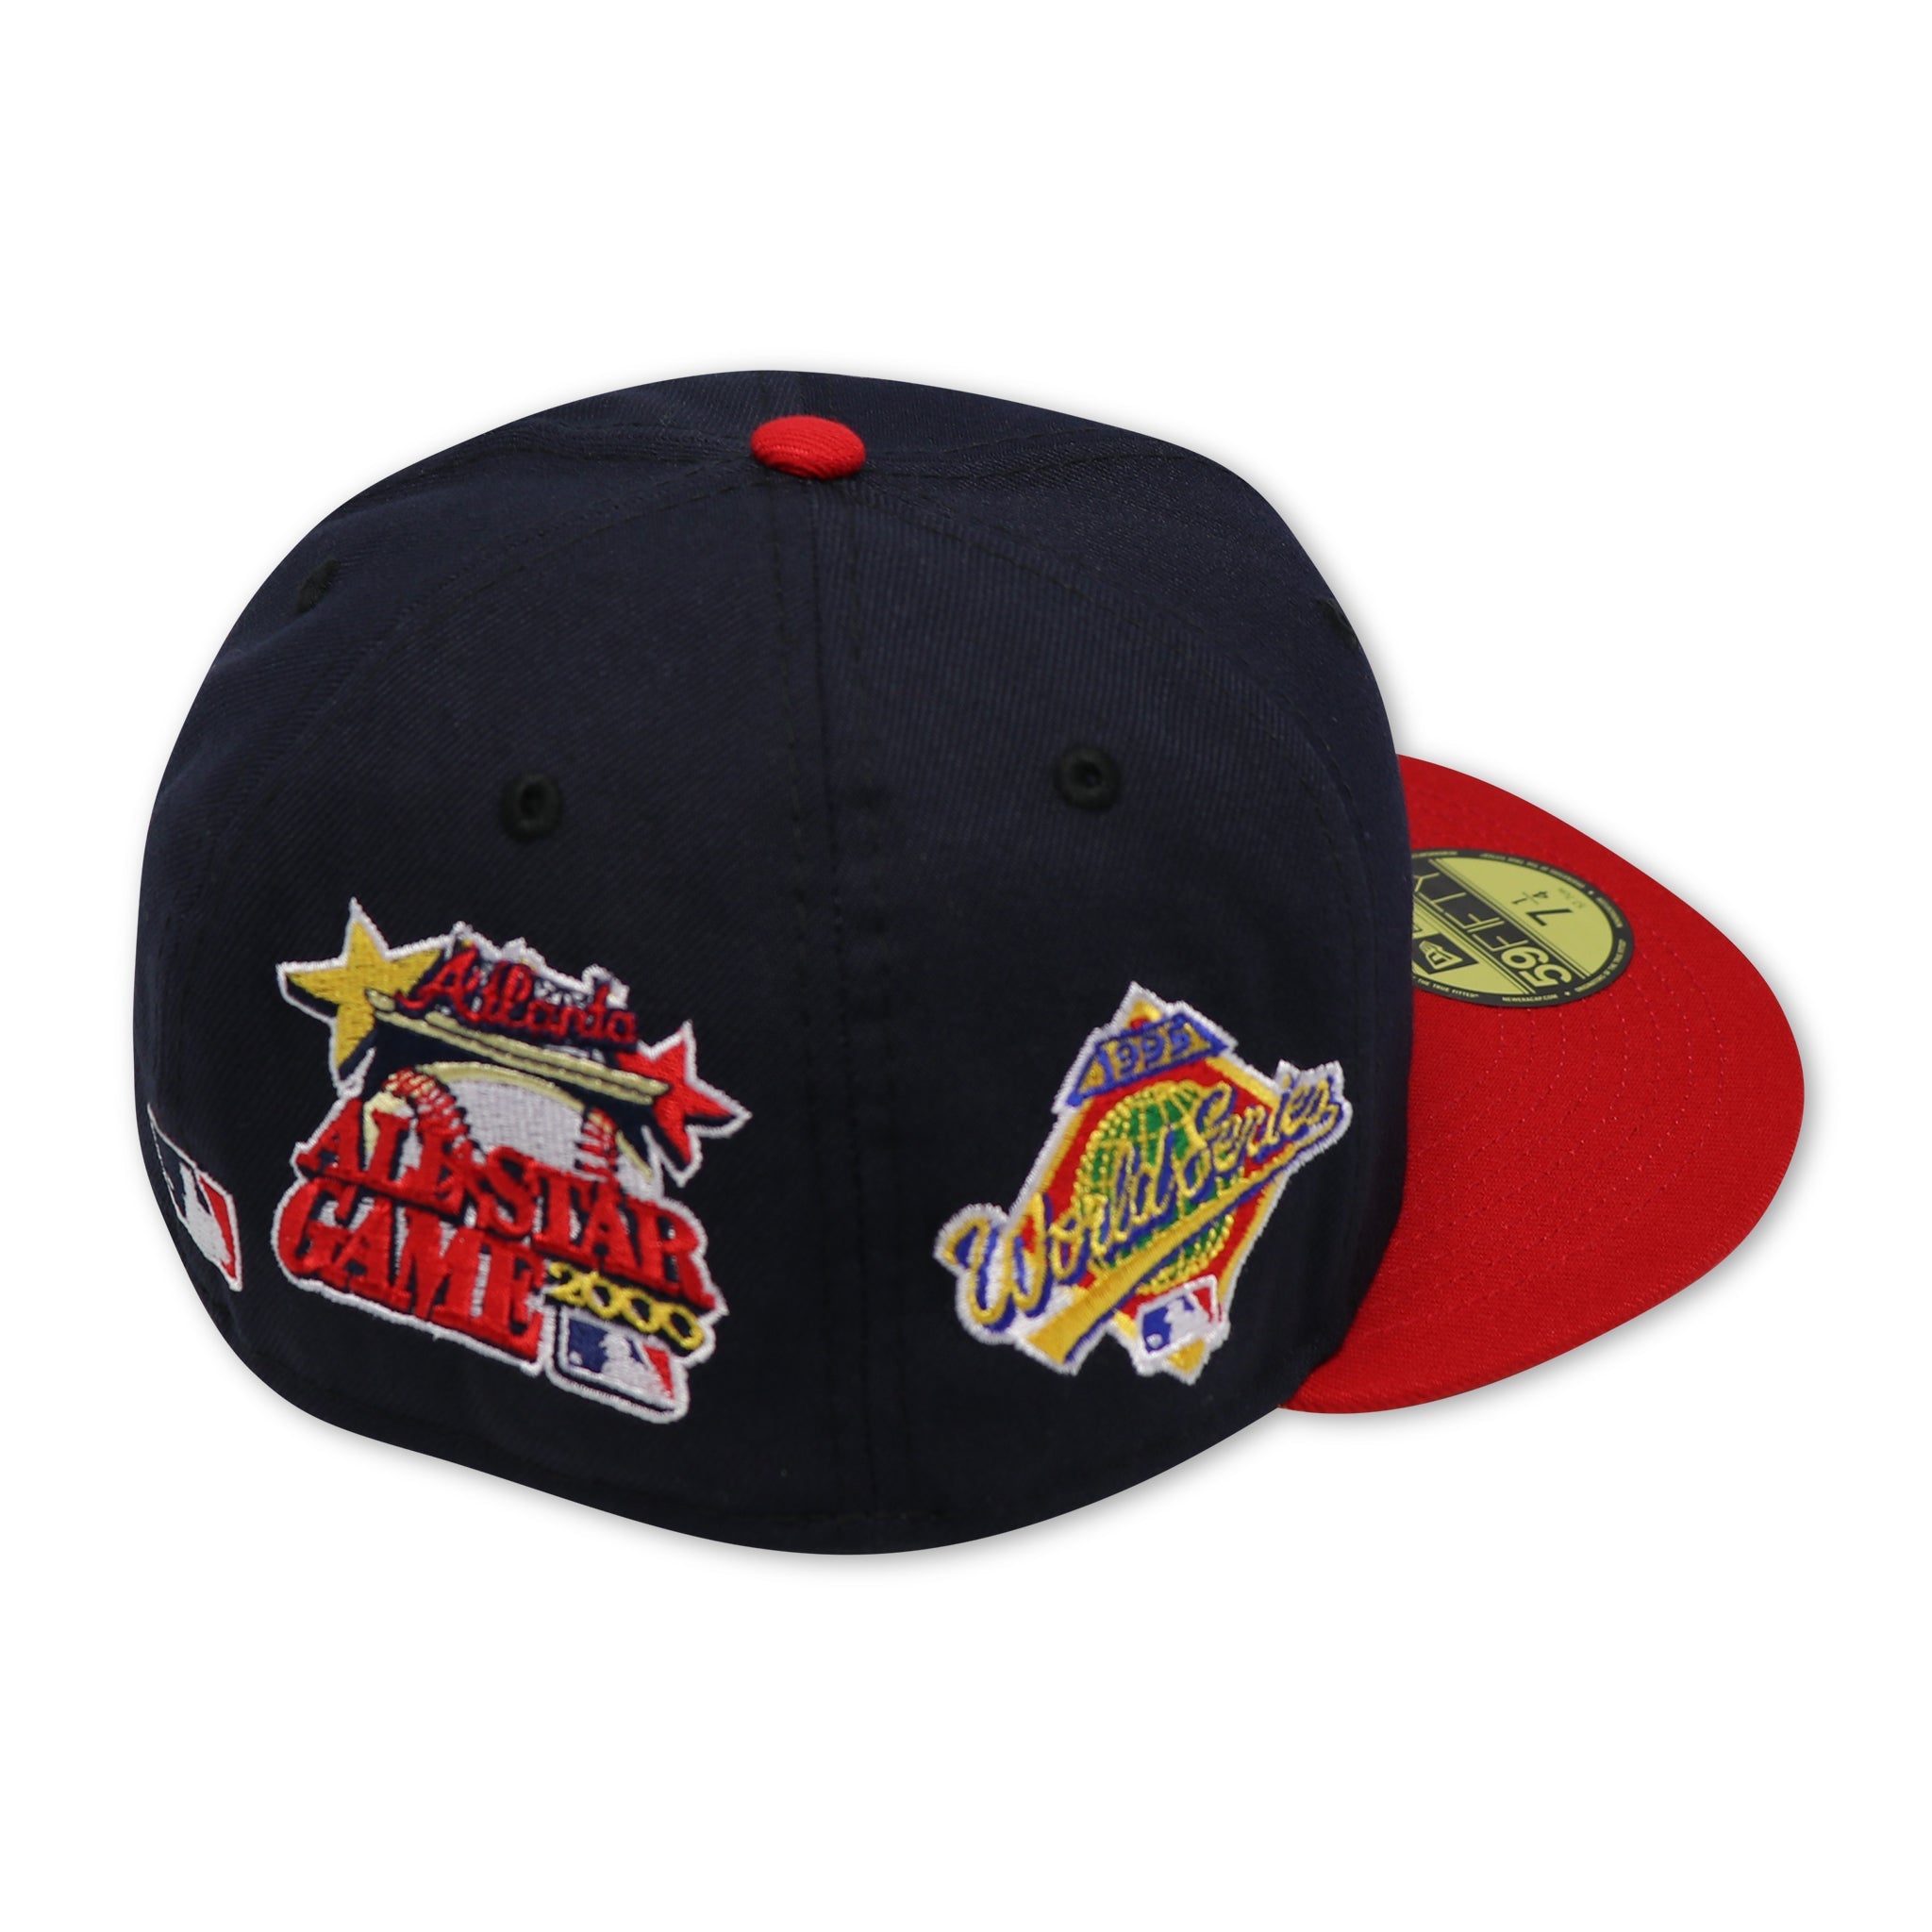 ATLANTA BRAVES "1995 WS X 2000 ASG" NEW ERA 59FIFTY FITTED (YELLOW UNDER VISOR)